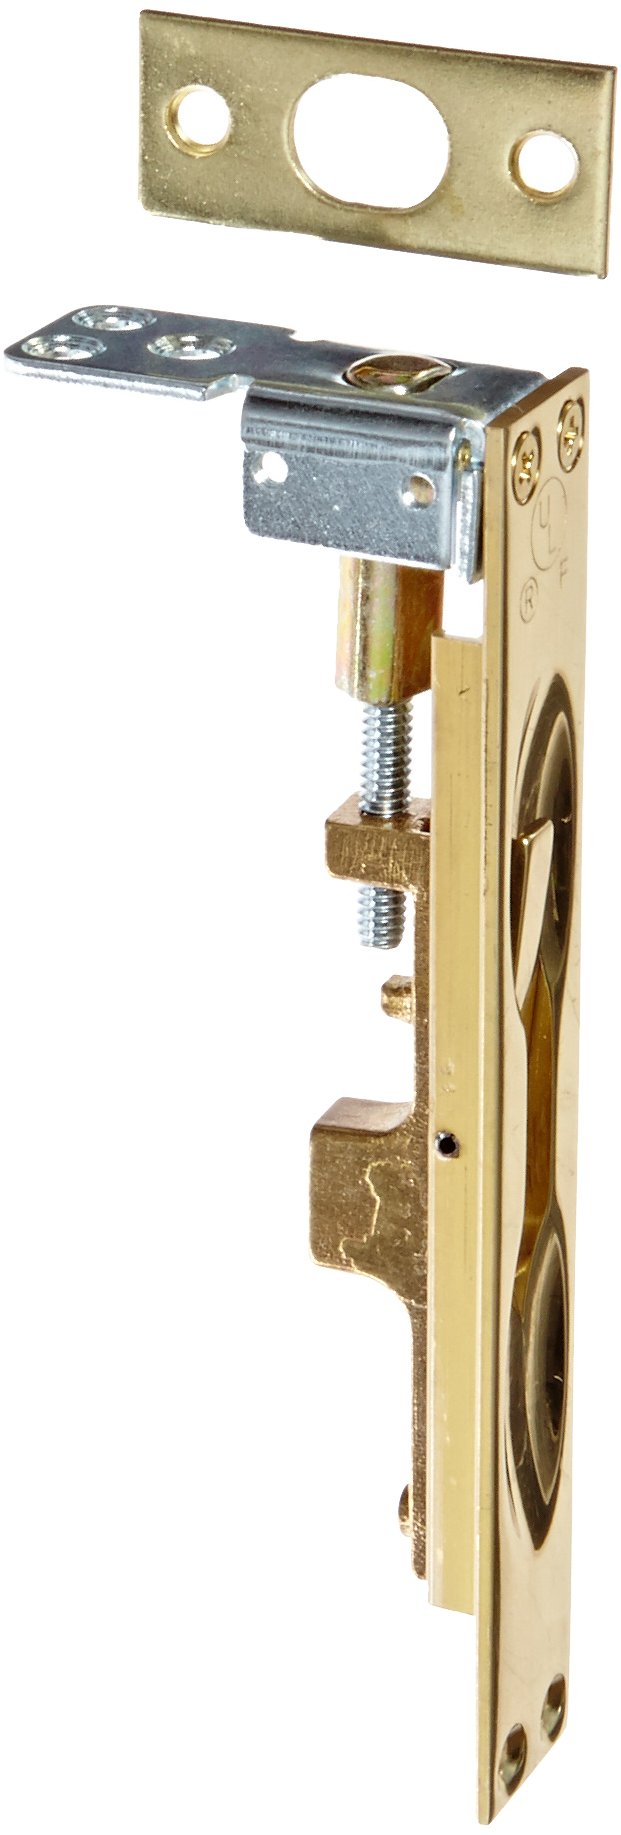 Rockwood 557.3 Lever Extension Flush Bolt for Fire-Rated Plastic & Wood Covered Doors, 1" Width x 6-3/4" Height, Brass Polished Clear Coated Finish